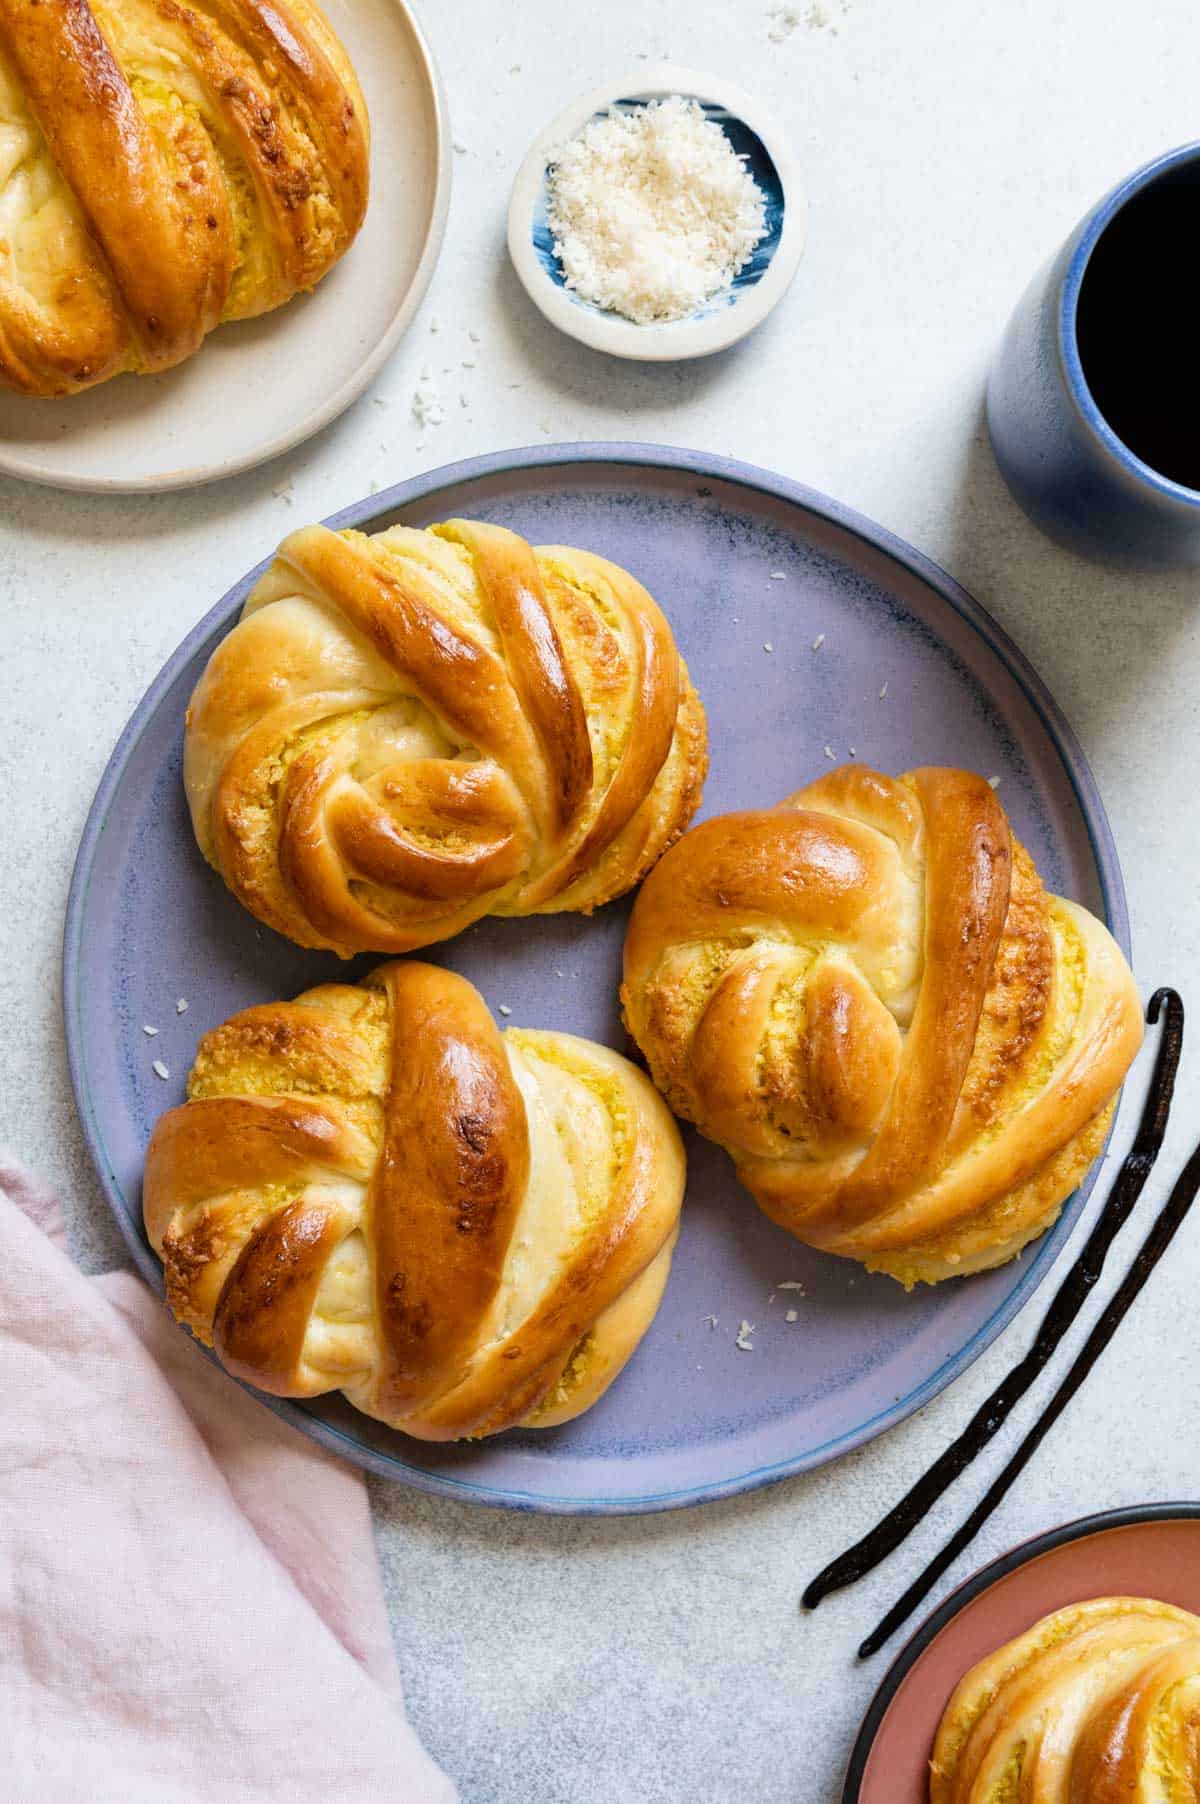 Chinese bakery-inspired coconut buns